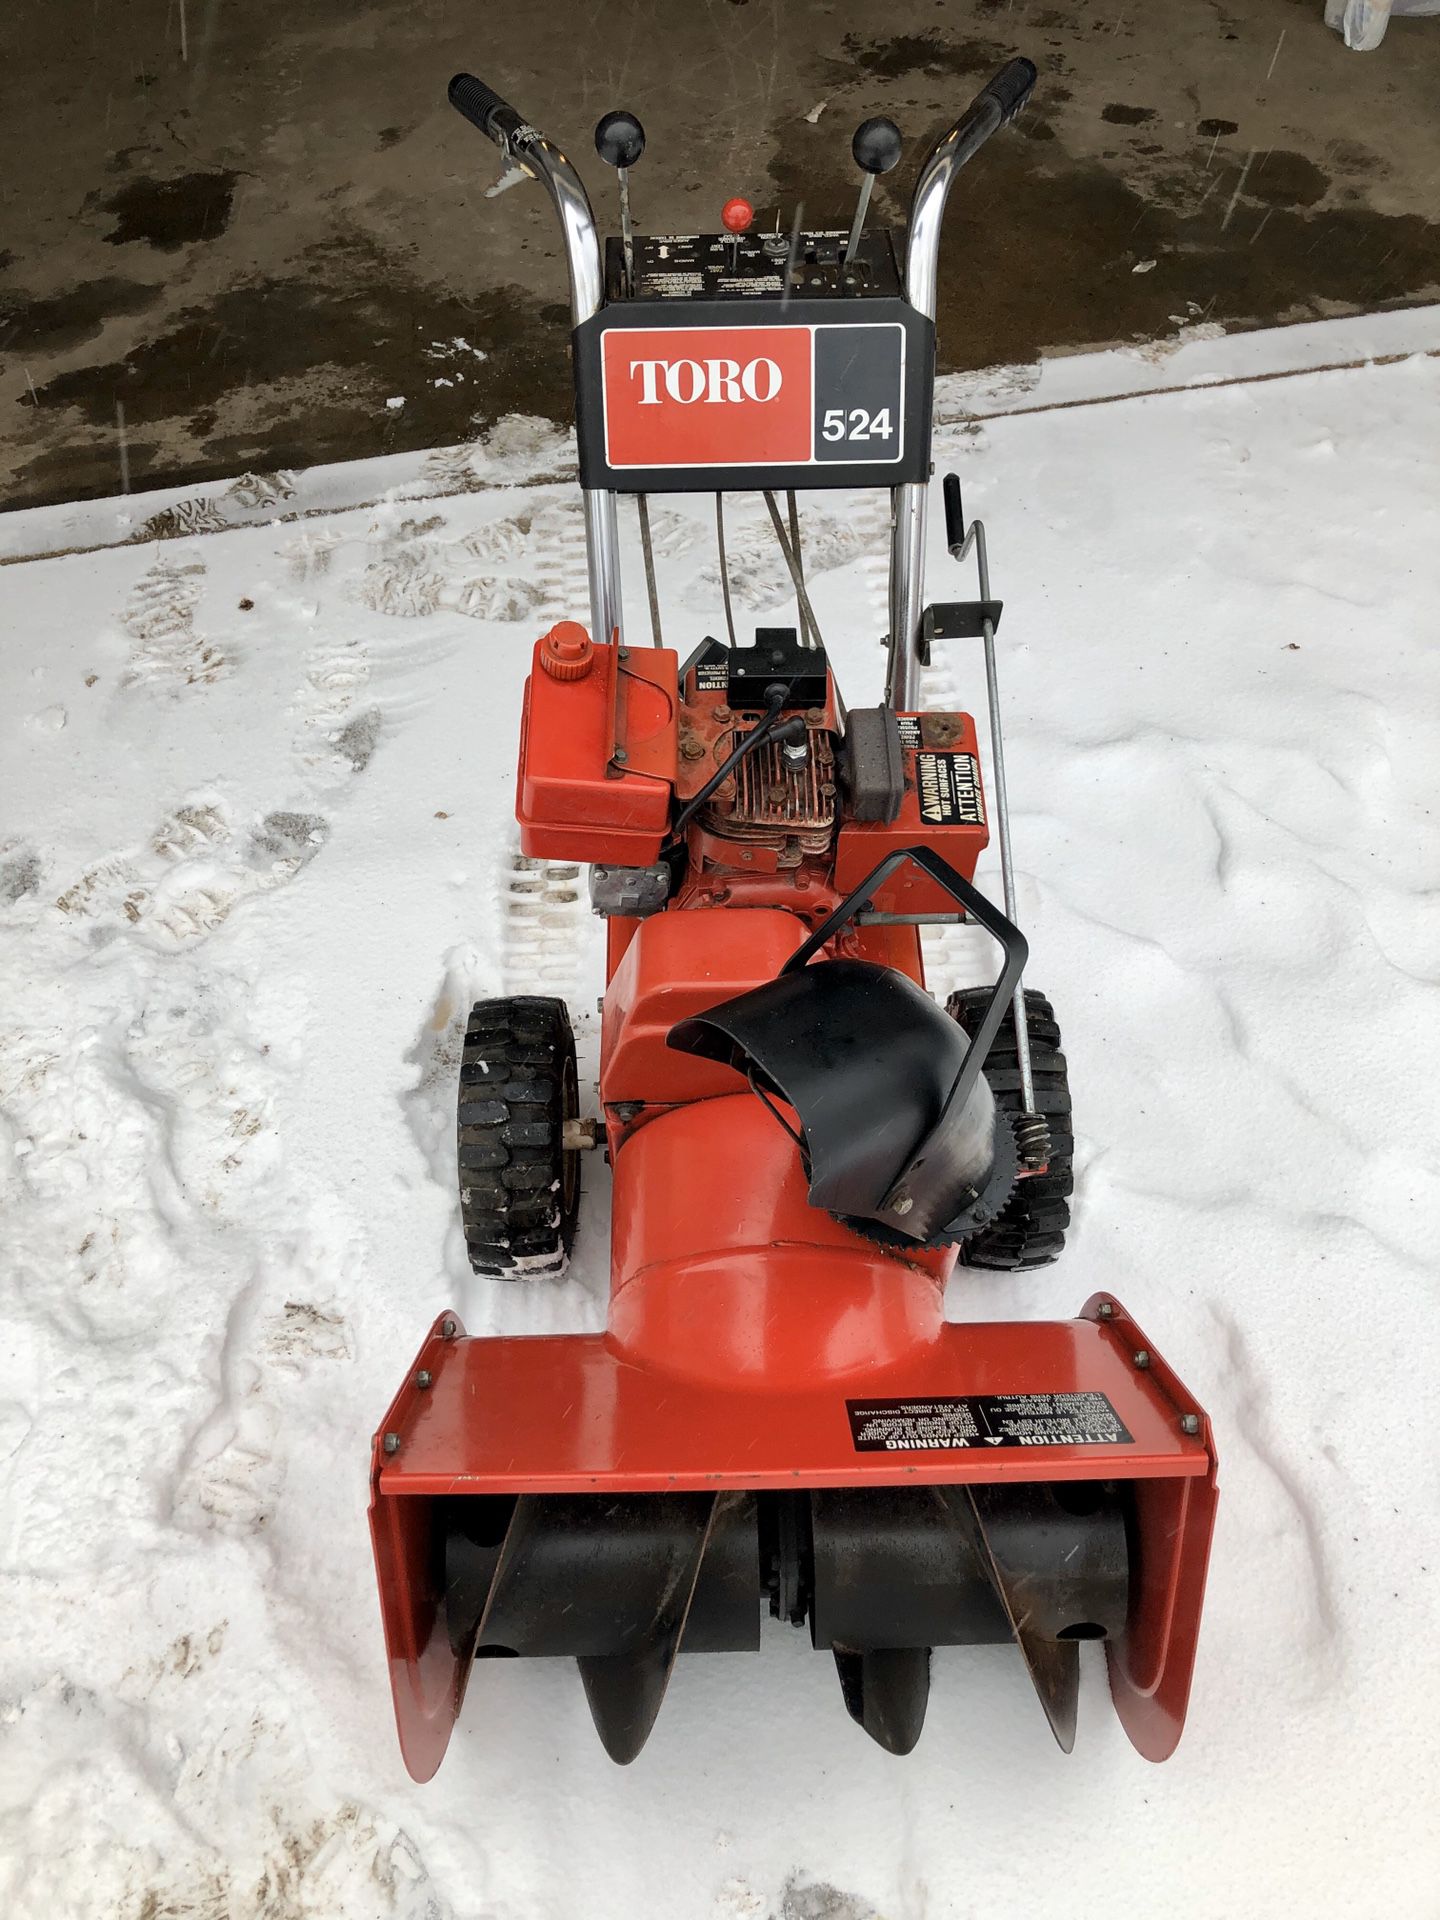 Toro 524 24” 5hp reconditioned snowblower with electric start